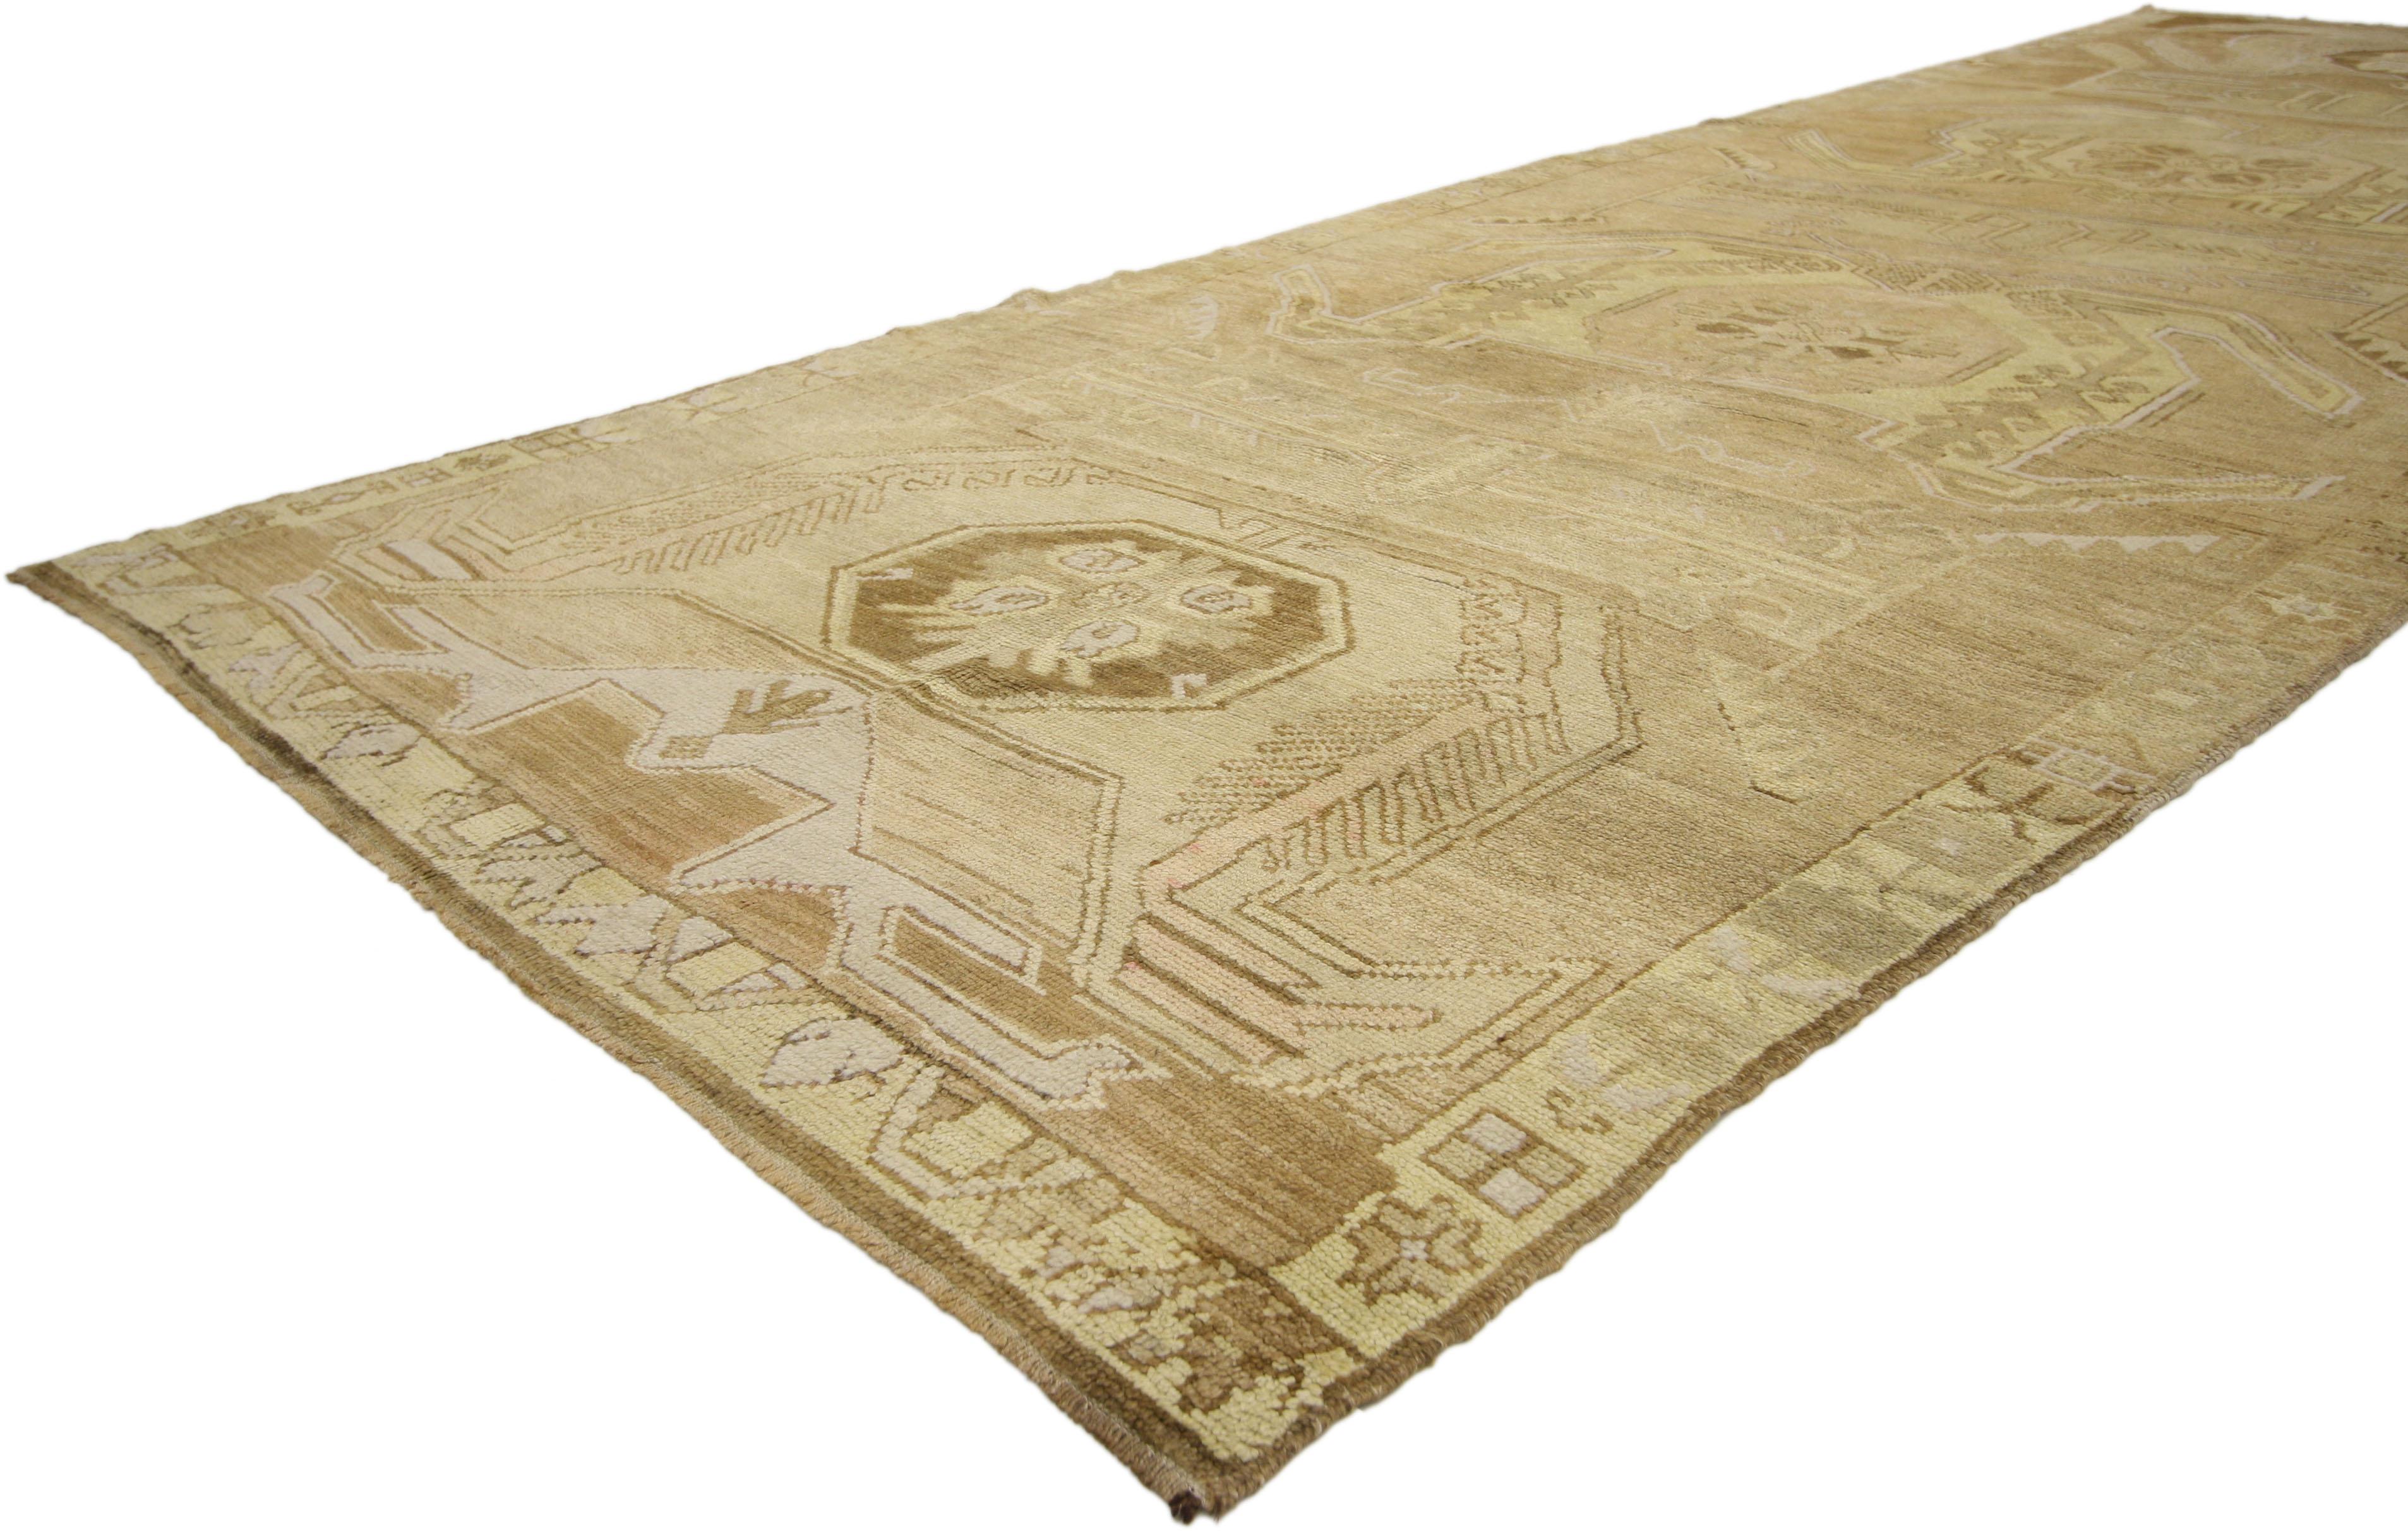 50585 Vintage Neutral Turkish Oushak Rug, 05'02 x 14'08. Immersed in classic Anatolian tradition and crafted with meticulous artisanal skill, antique-washed Turkish Oushak rugs originate from the revered Oushak region, where they undergo a